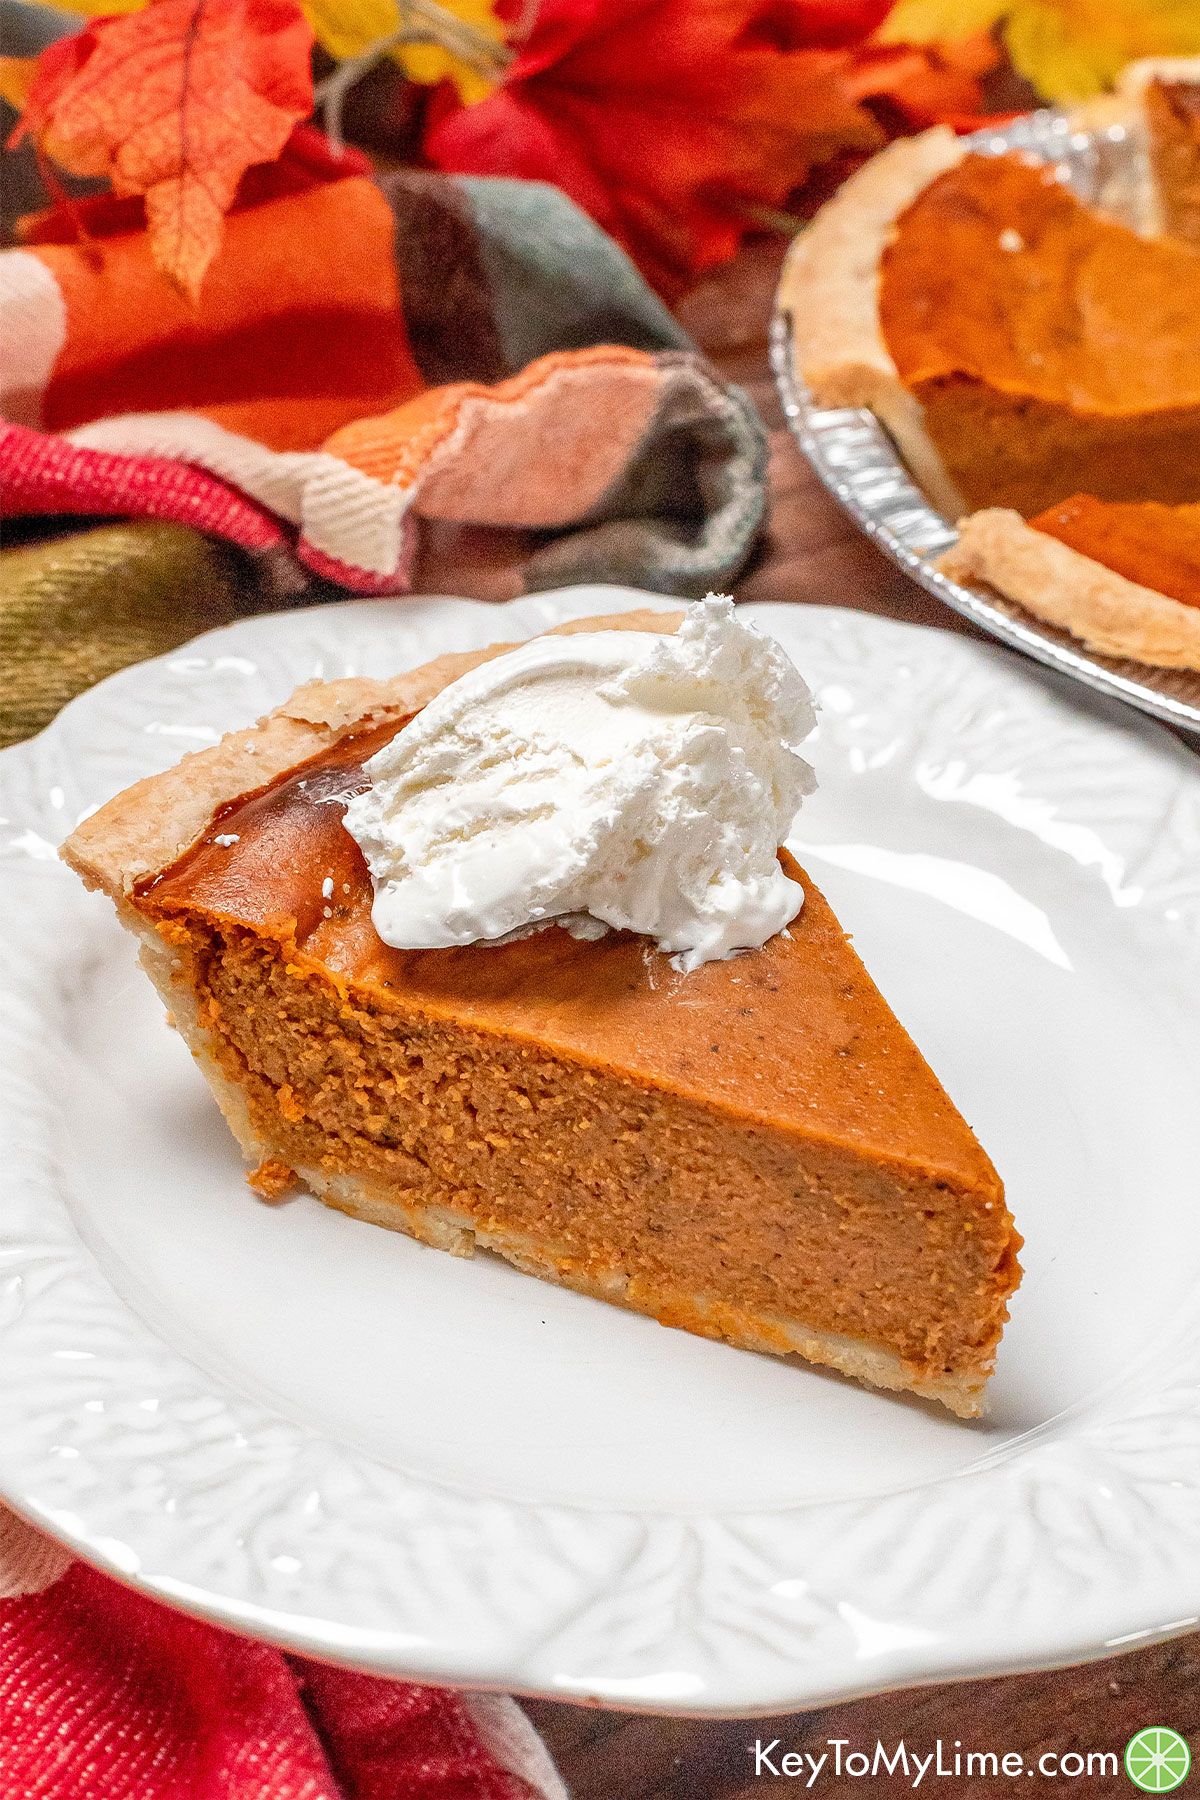 A slice of pie on a plate with fall decorations in the background.